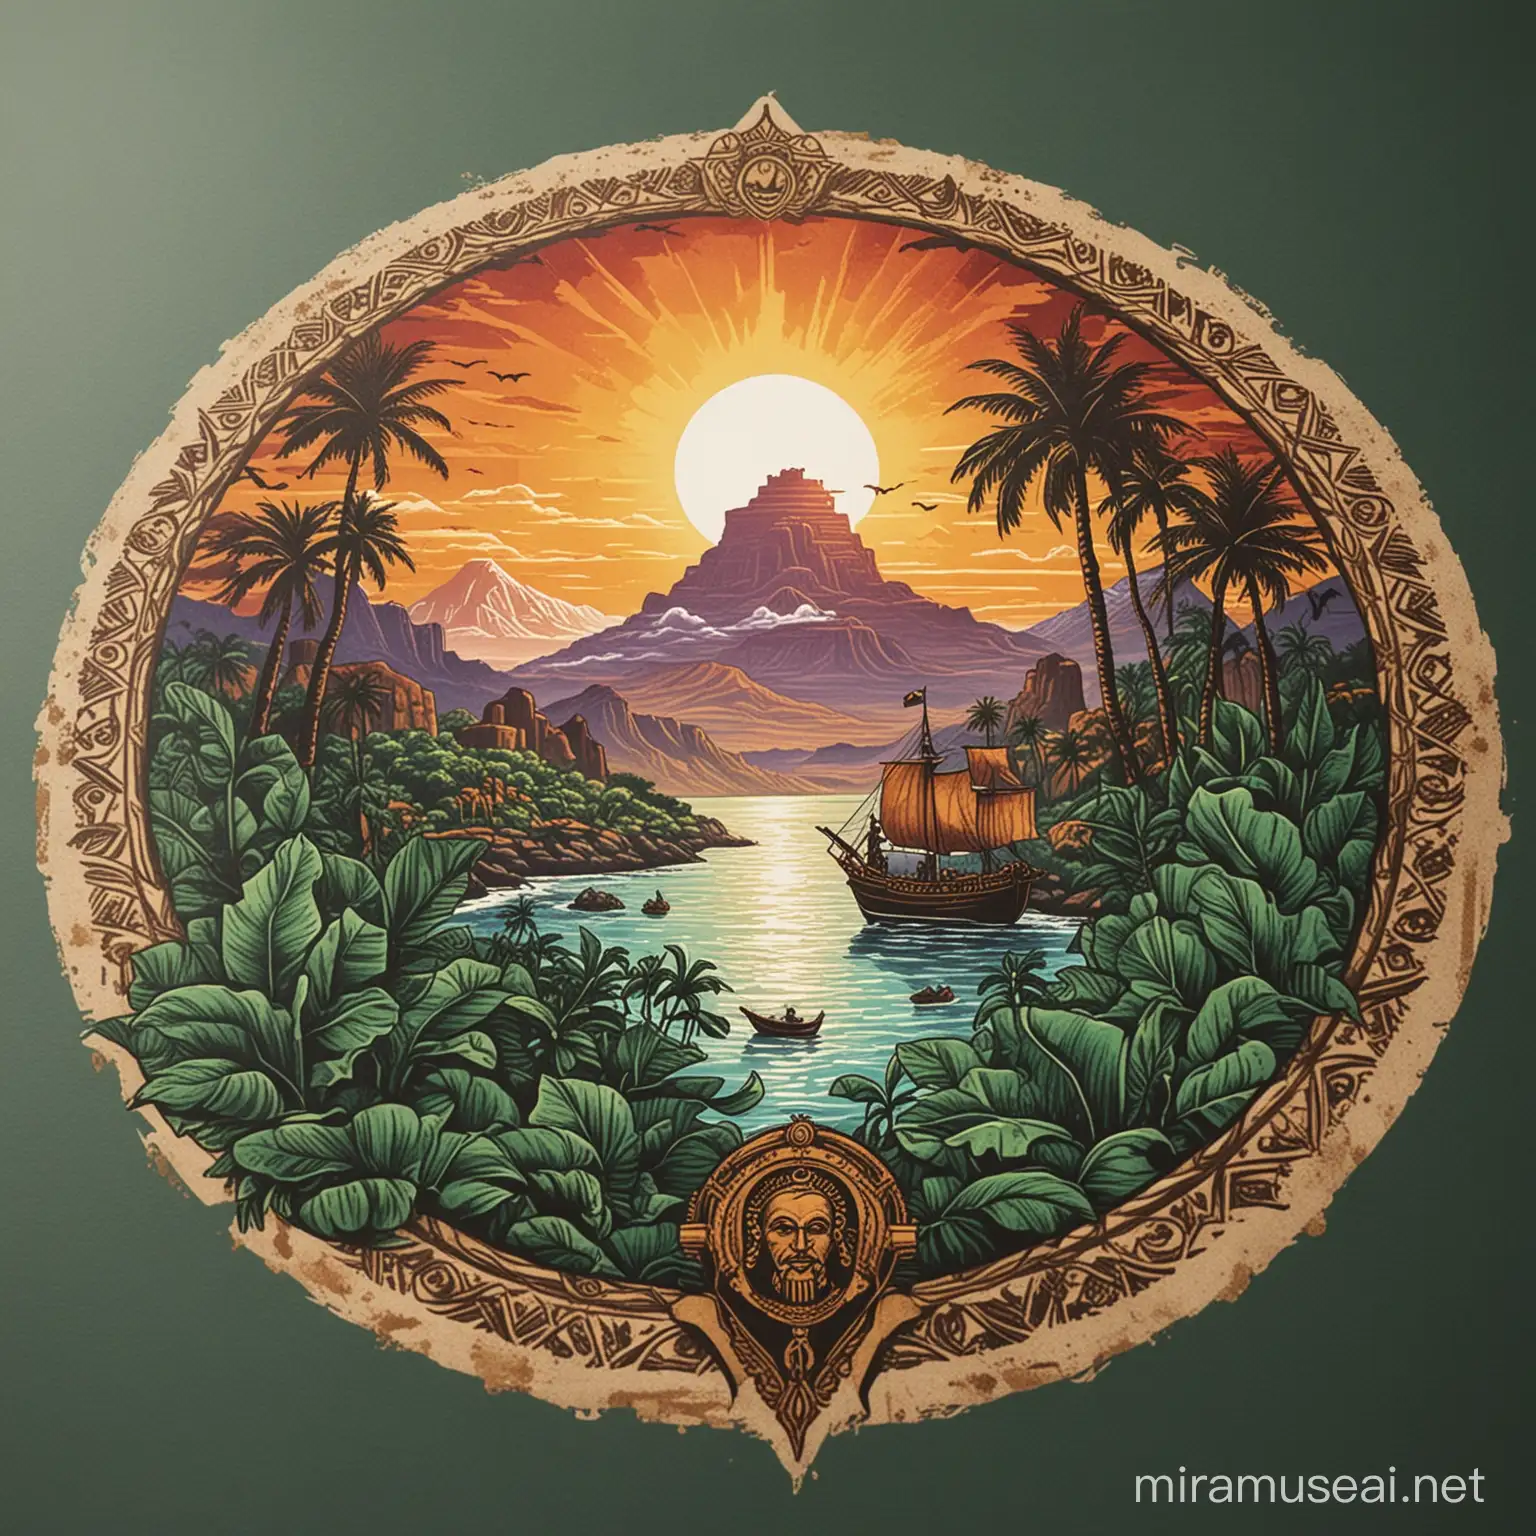 create a coloured realistic  indian spice visual with maui mountains in the background and pirates ship in an ocean running through it, with the sun rising in power between the mountains, create a perfect flat logo with a silouette of African castles,
, perfect  and clear cultural images of wakandan writing , safari foreground, ocean and gentle mountains  which Includes a visible image of a majestic Powerful Ancient African King inside the circle, 1-2 colors,emarald, block print technique, no copy/type on logo, taro leaves in foreground with golden outline around the leaves.
